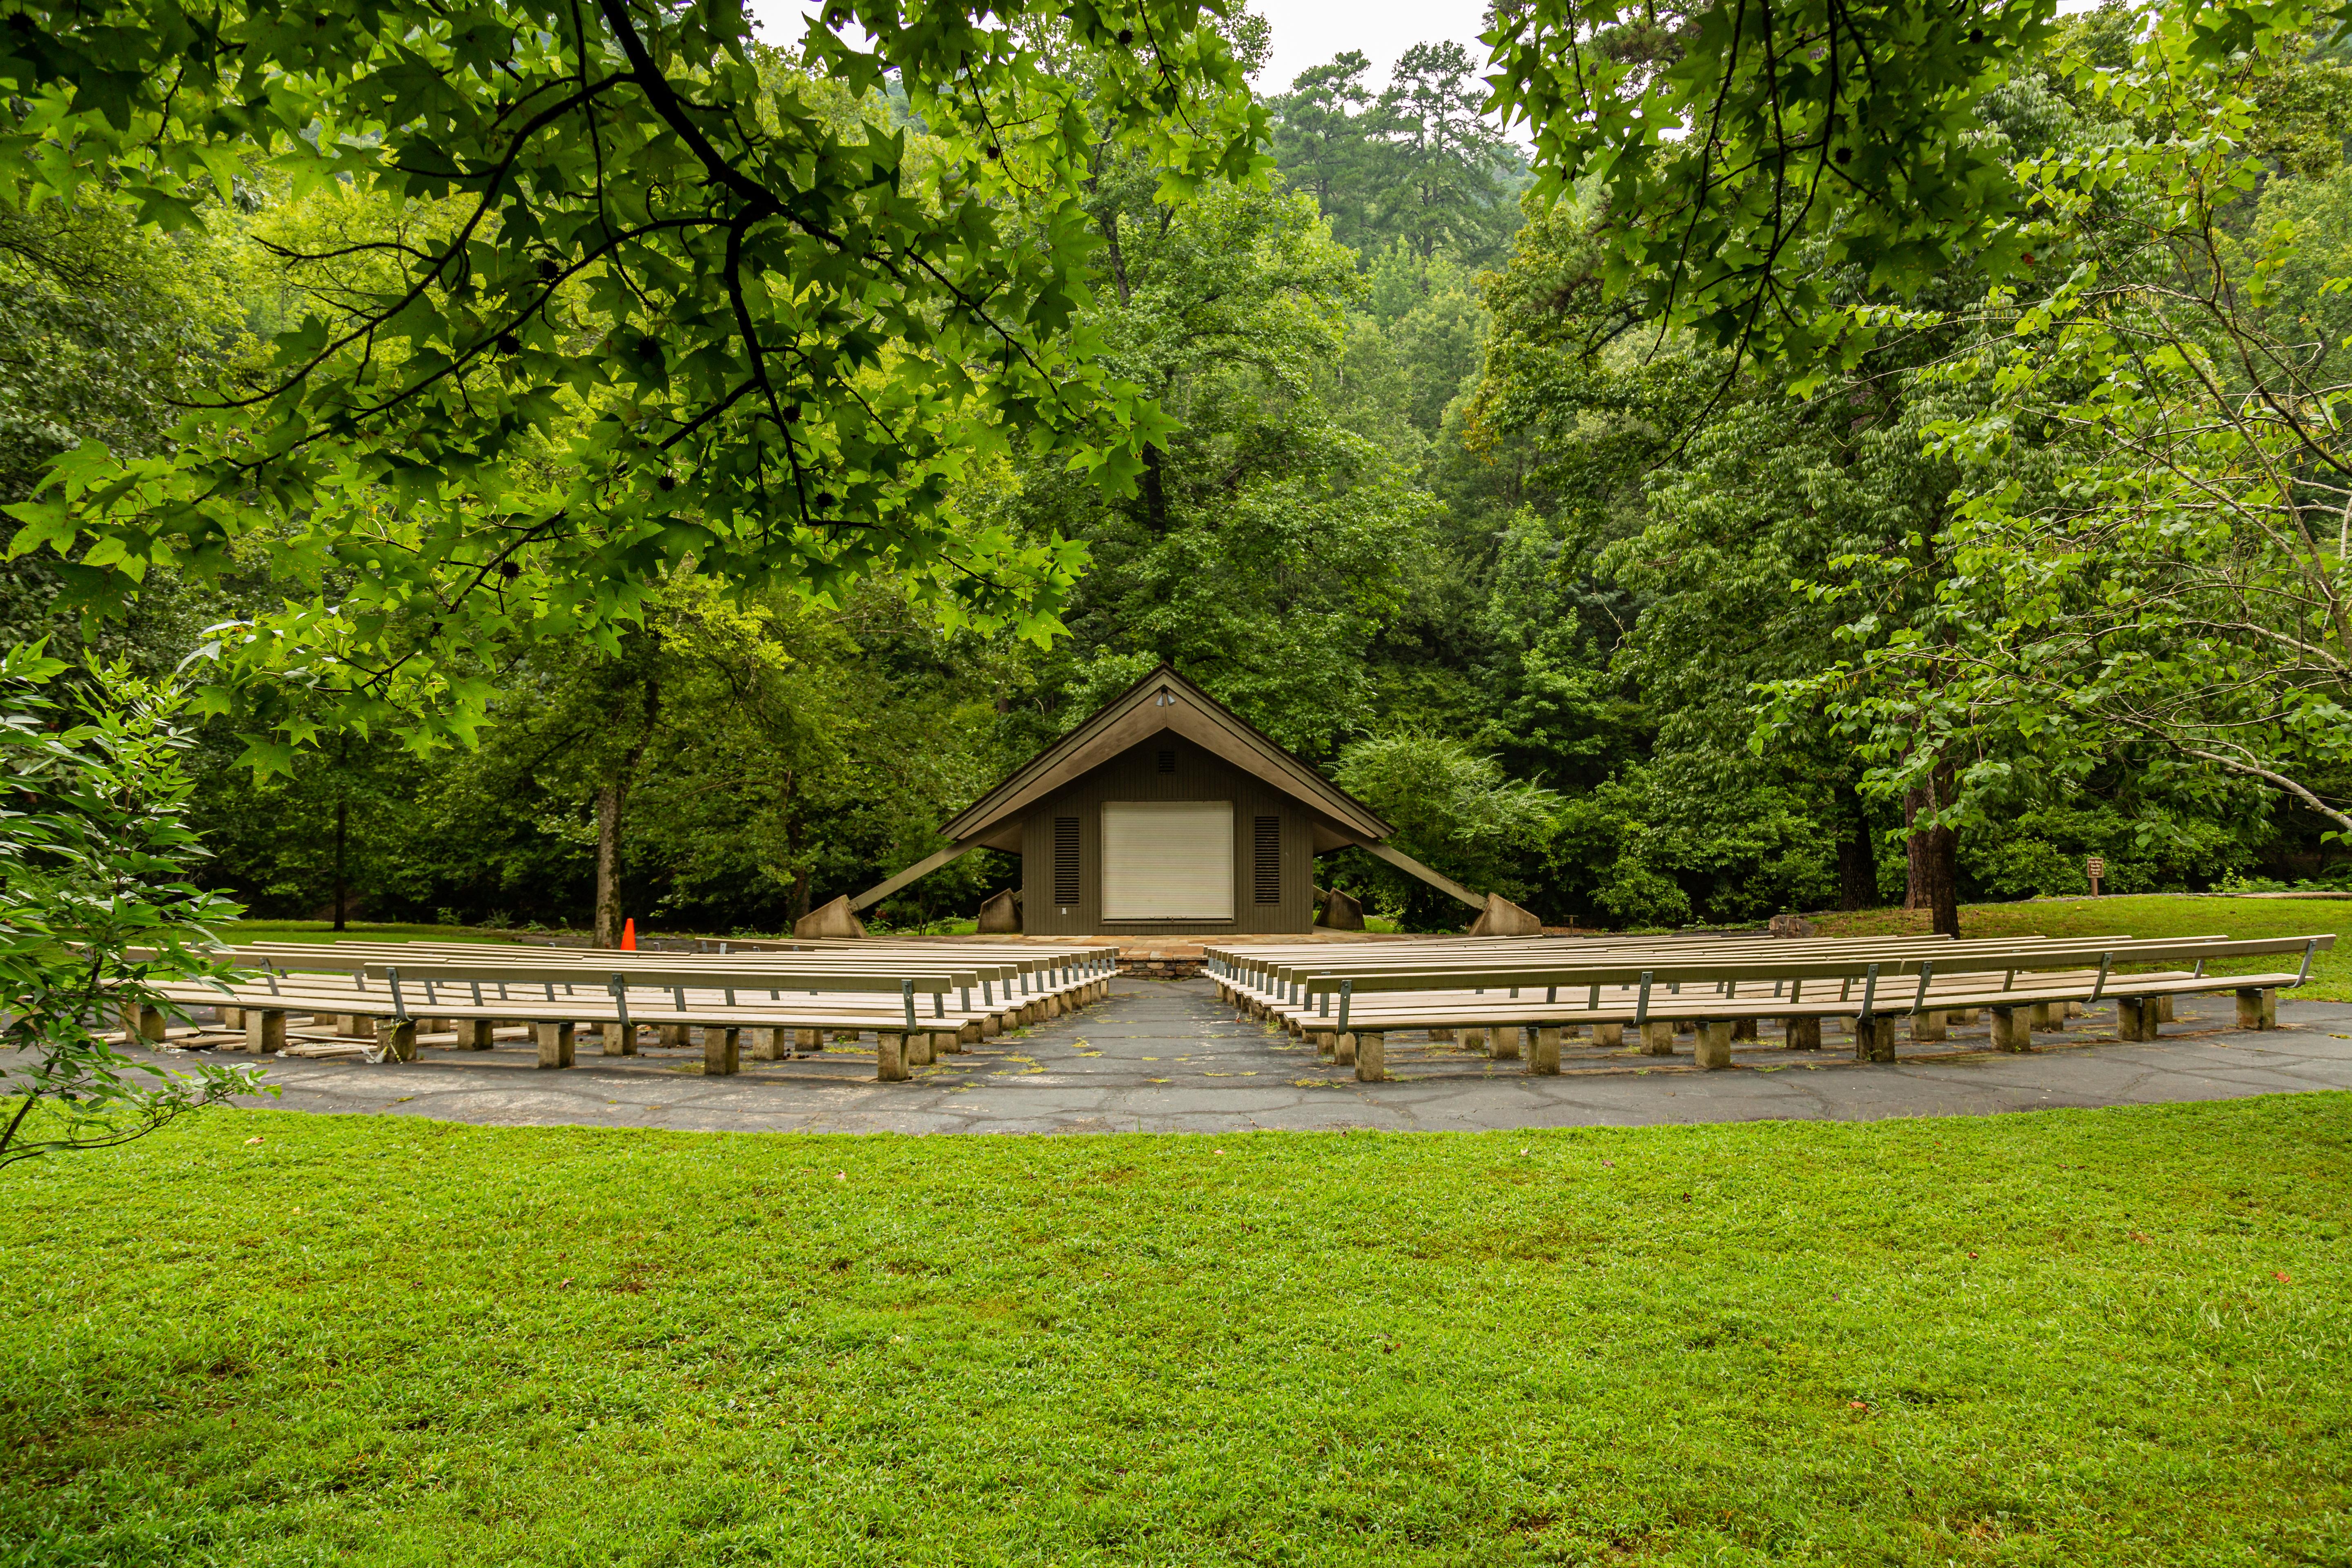 An amphitheater with rows of seating on a lawn within the trees